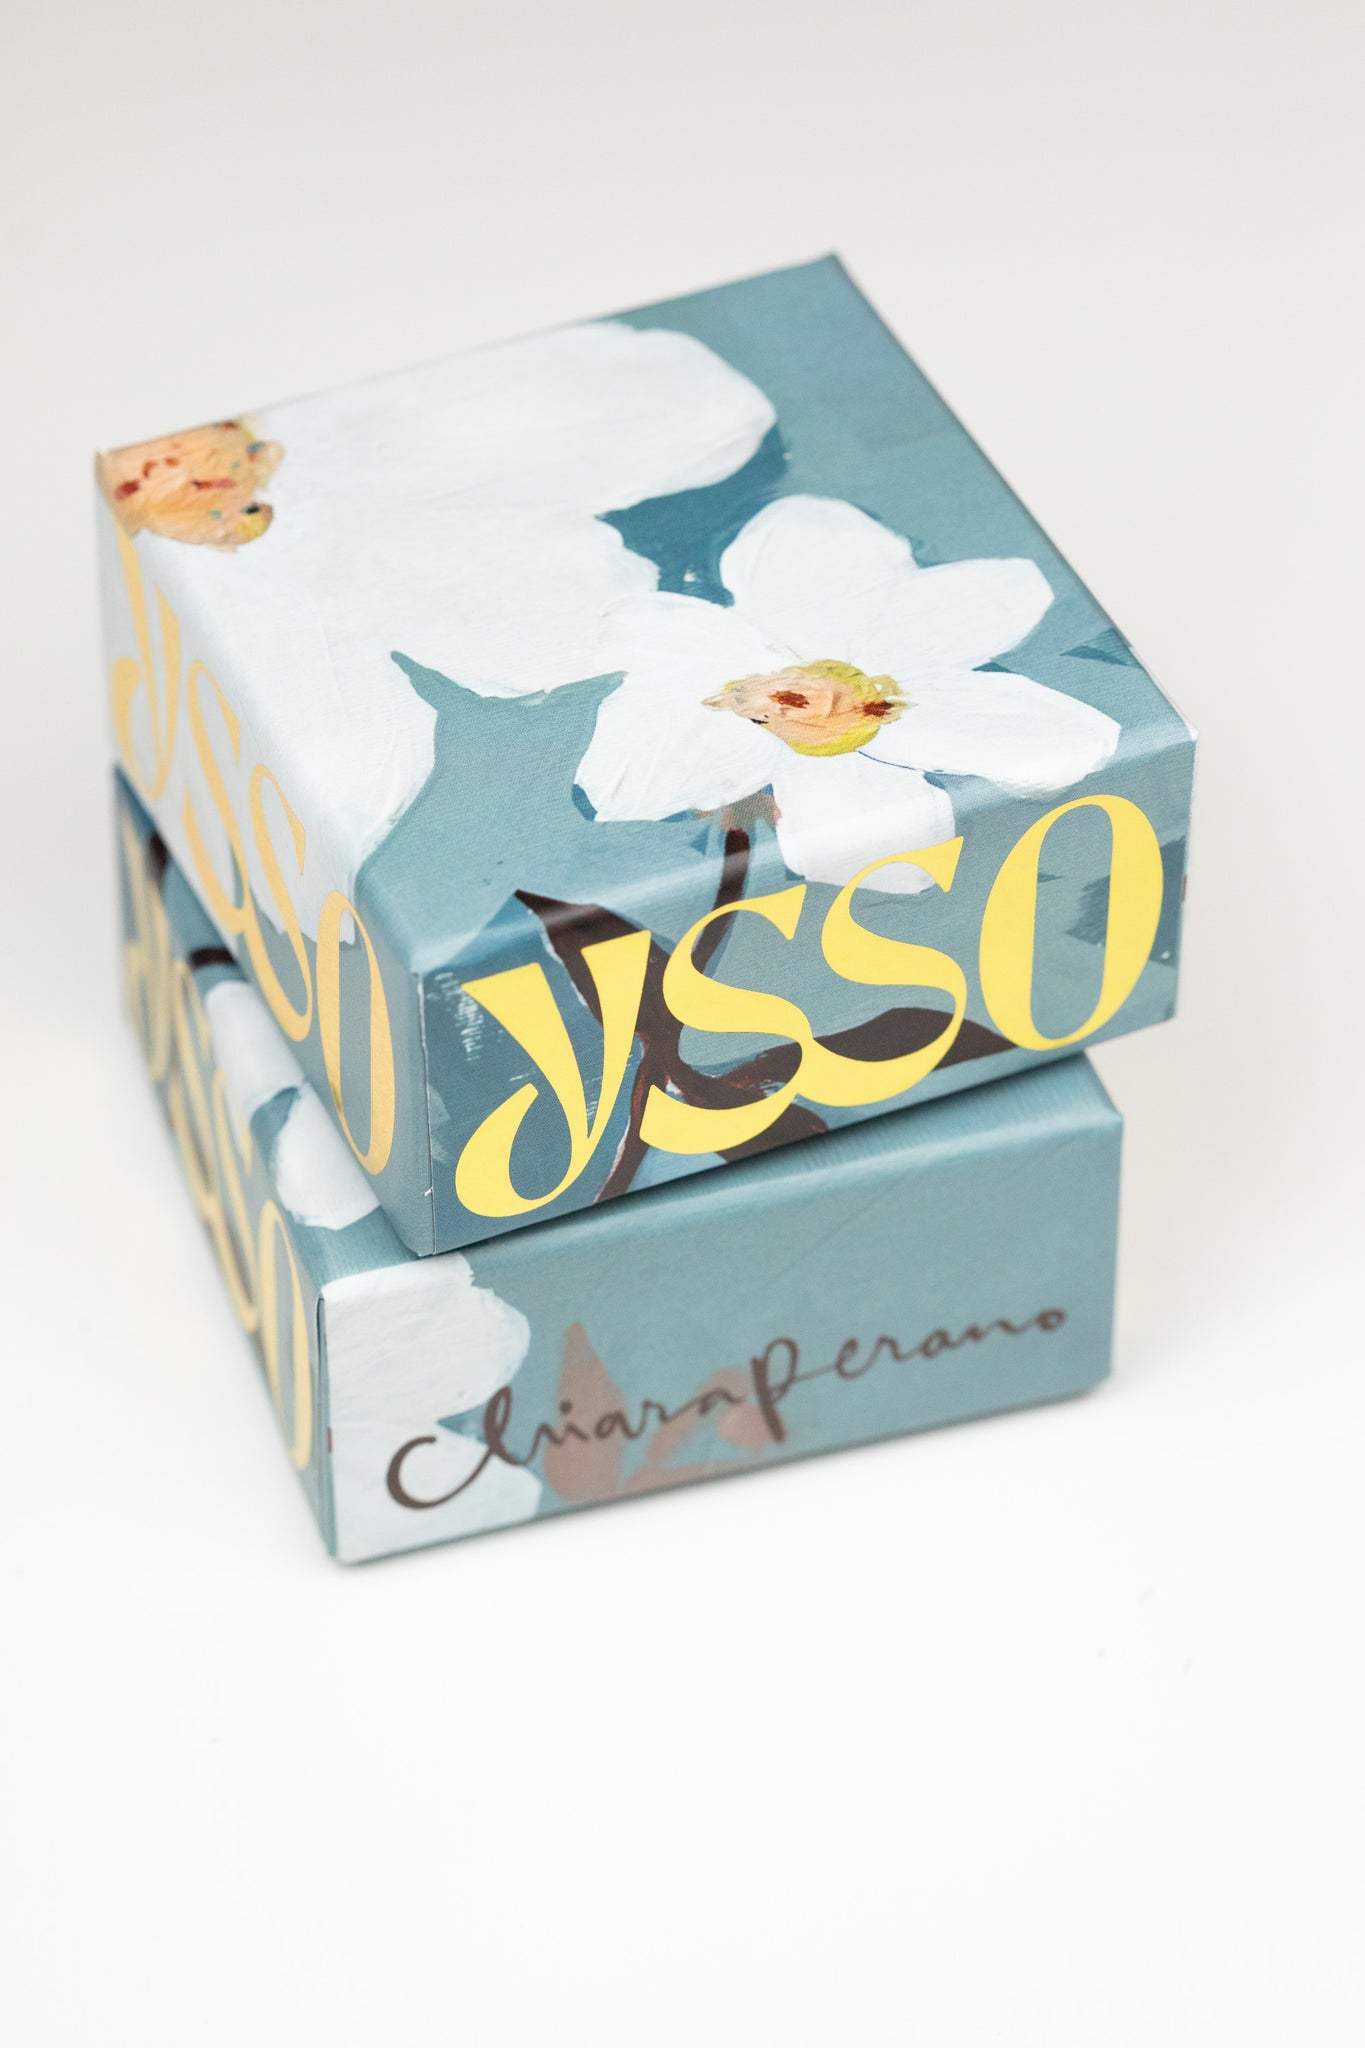 Limited Edition Charity Box